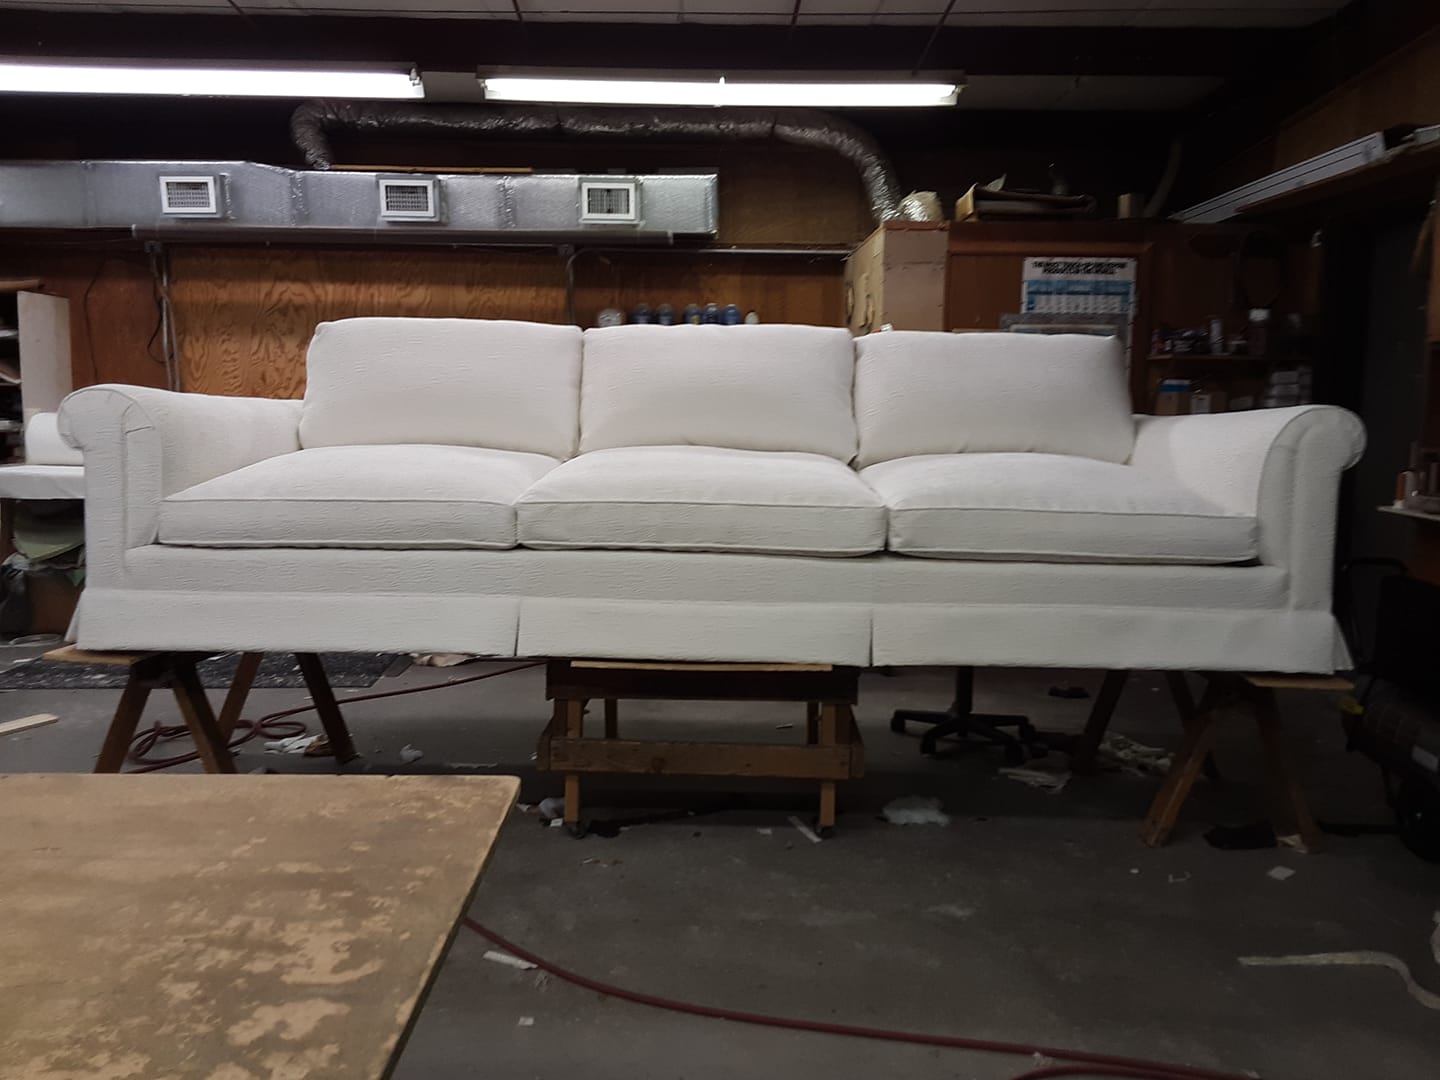 R & S Upholstery Services